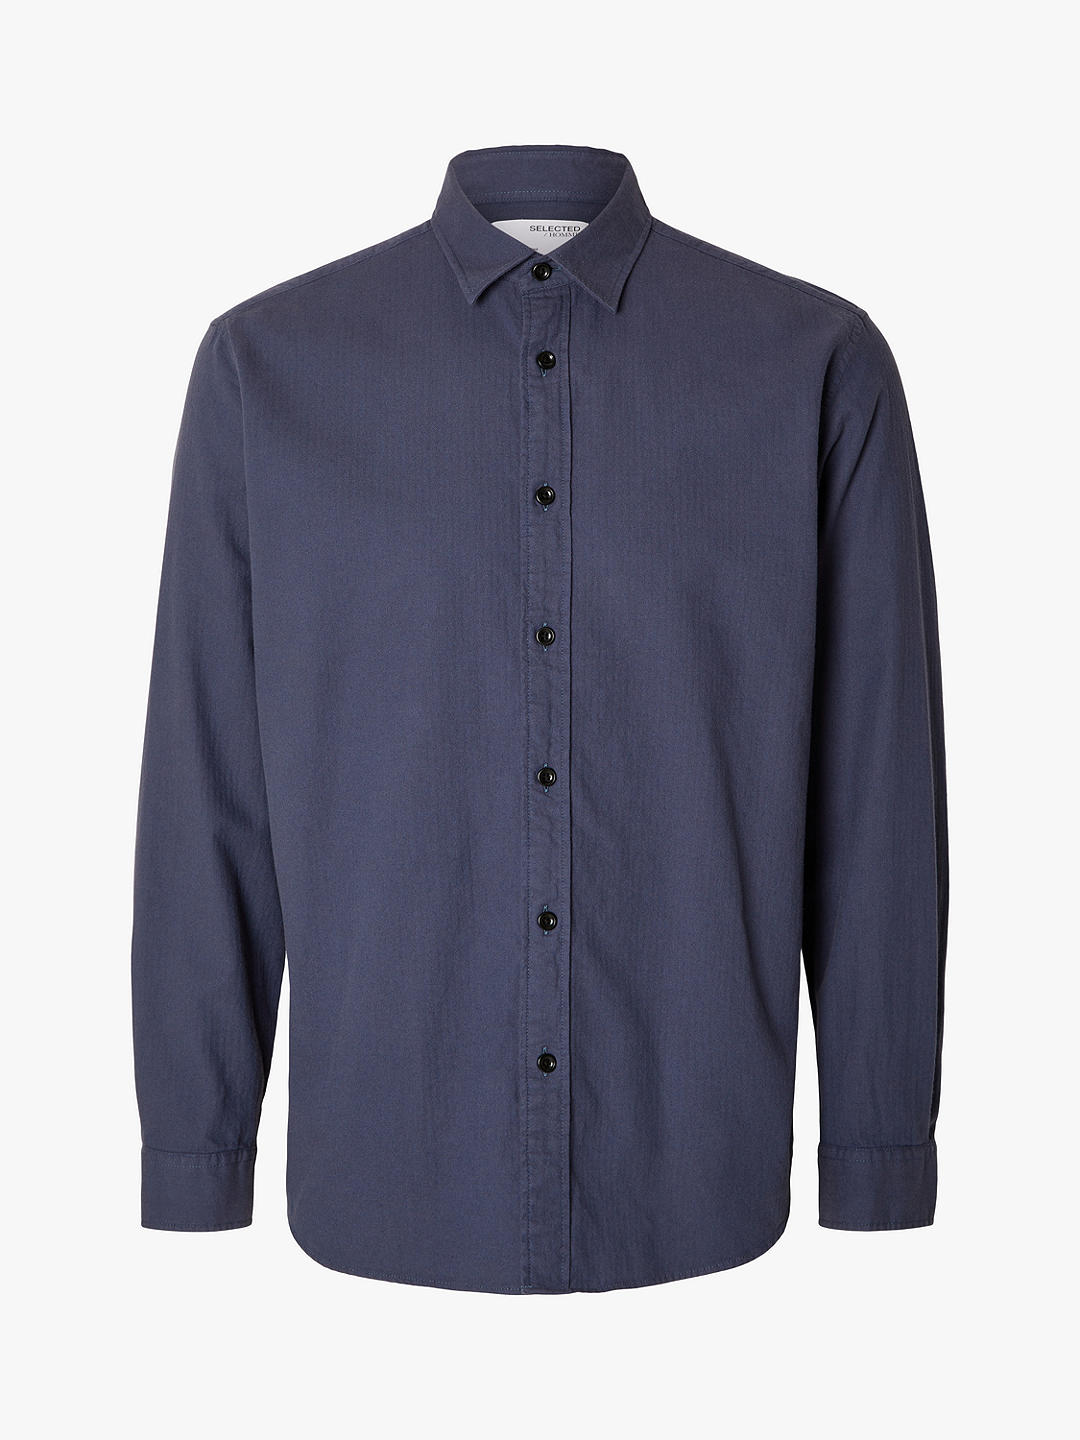 SELECTED HOMME Owen Recycled Cotton Flannel Shirt, Blue Depths